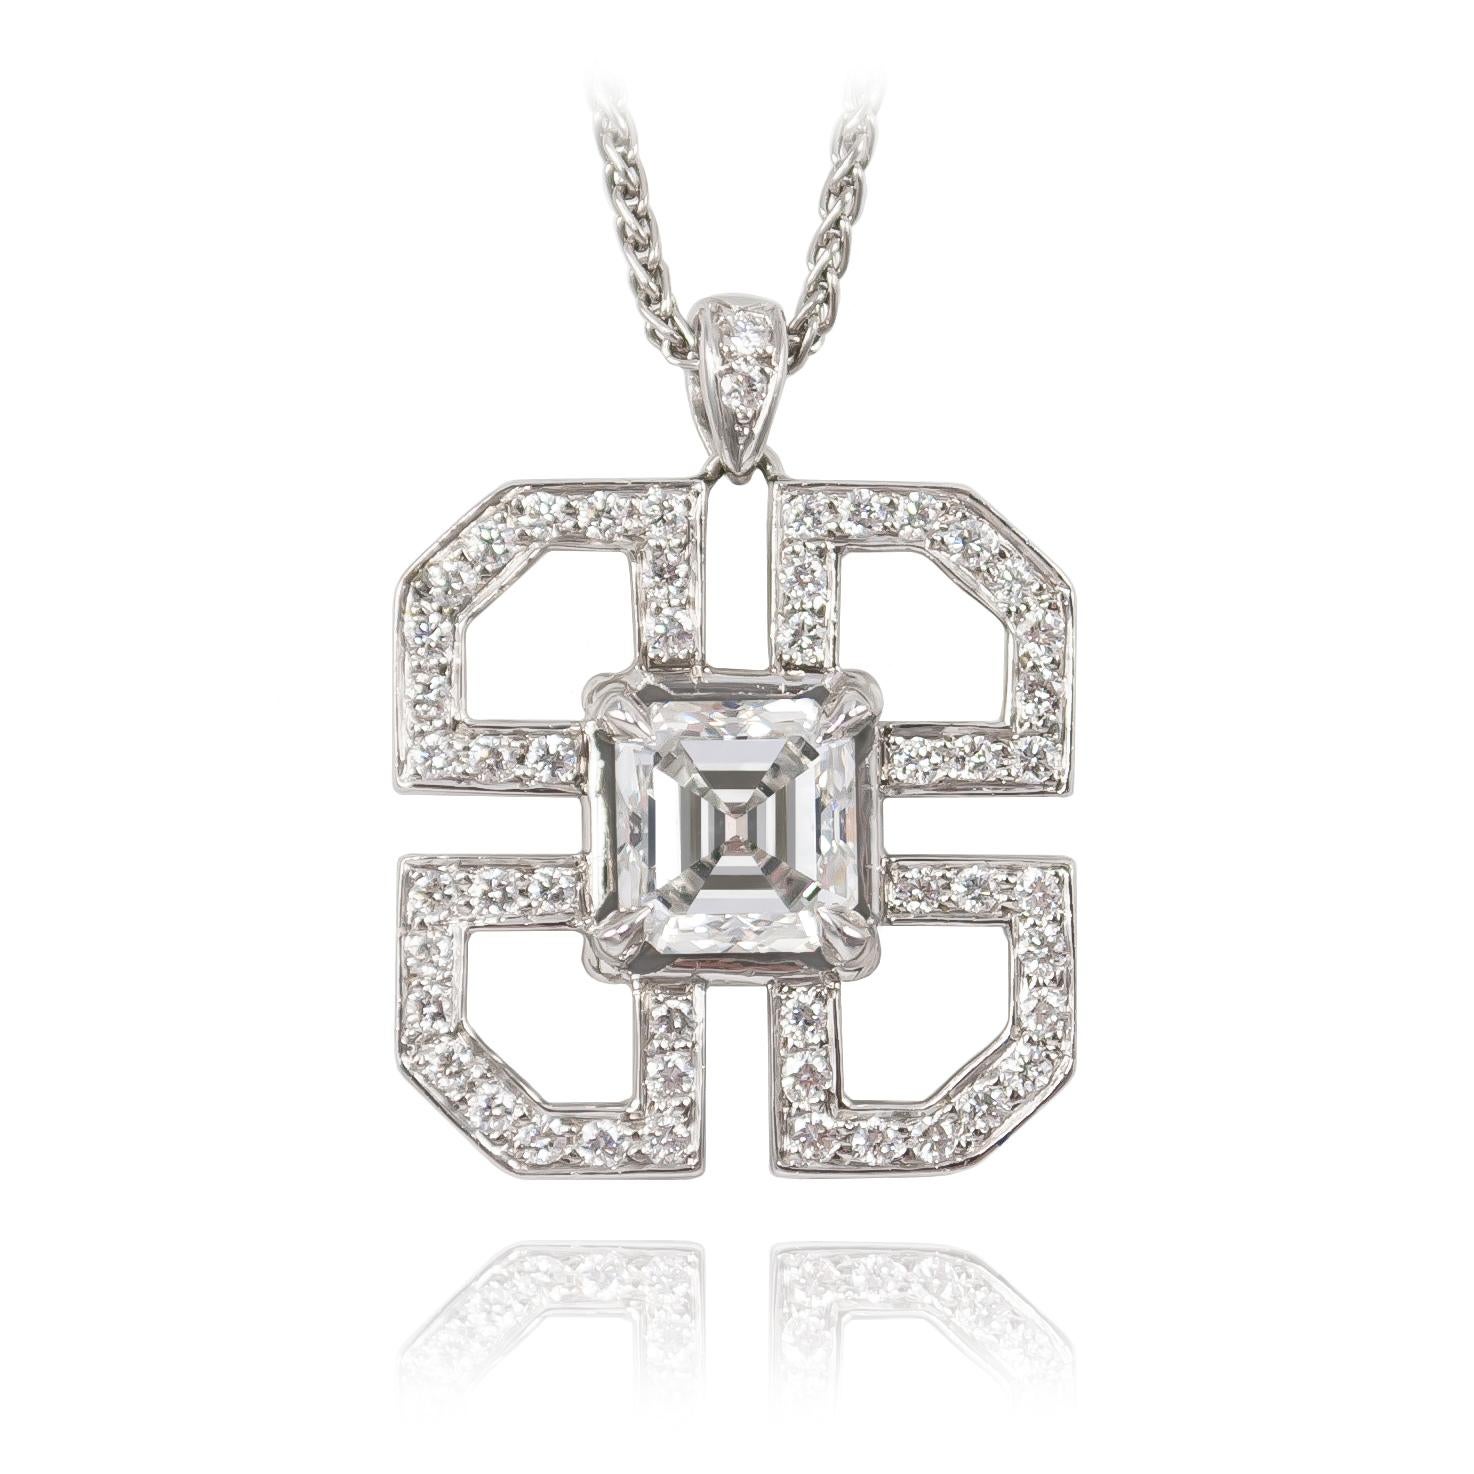 Sleek and sophisticated, this Art Deco inspired necklace by J. Birnbach is a unique piece that can be worn daily or for special occasions. 

This beautiful necklace features a GIA Certified 1.01 carat Asscher cut diamond of H color and SI2 clarity.